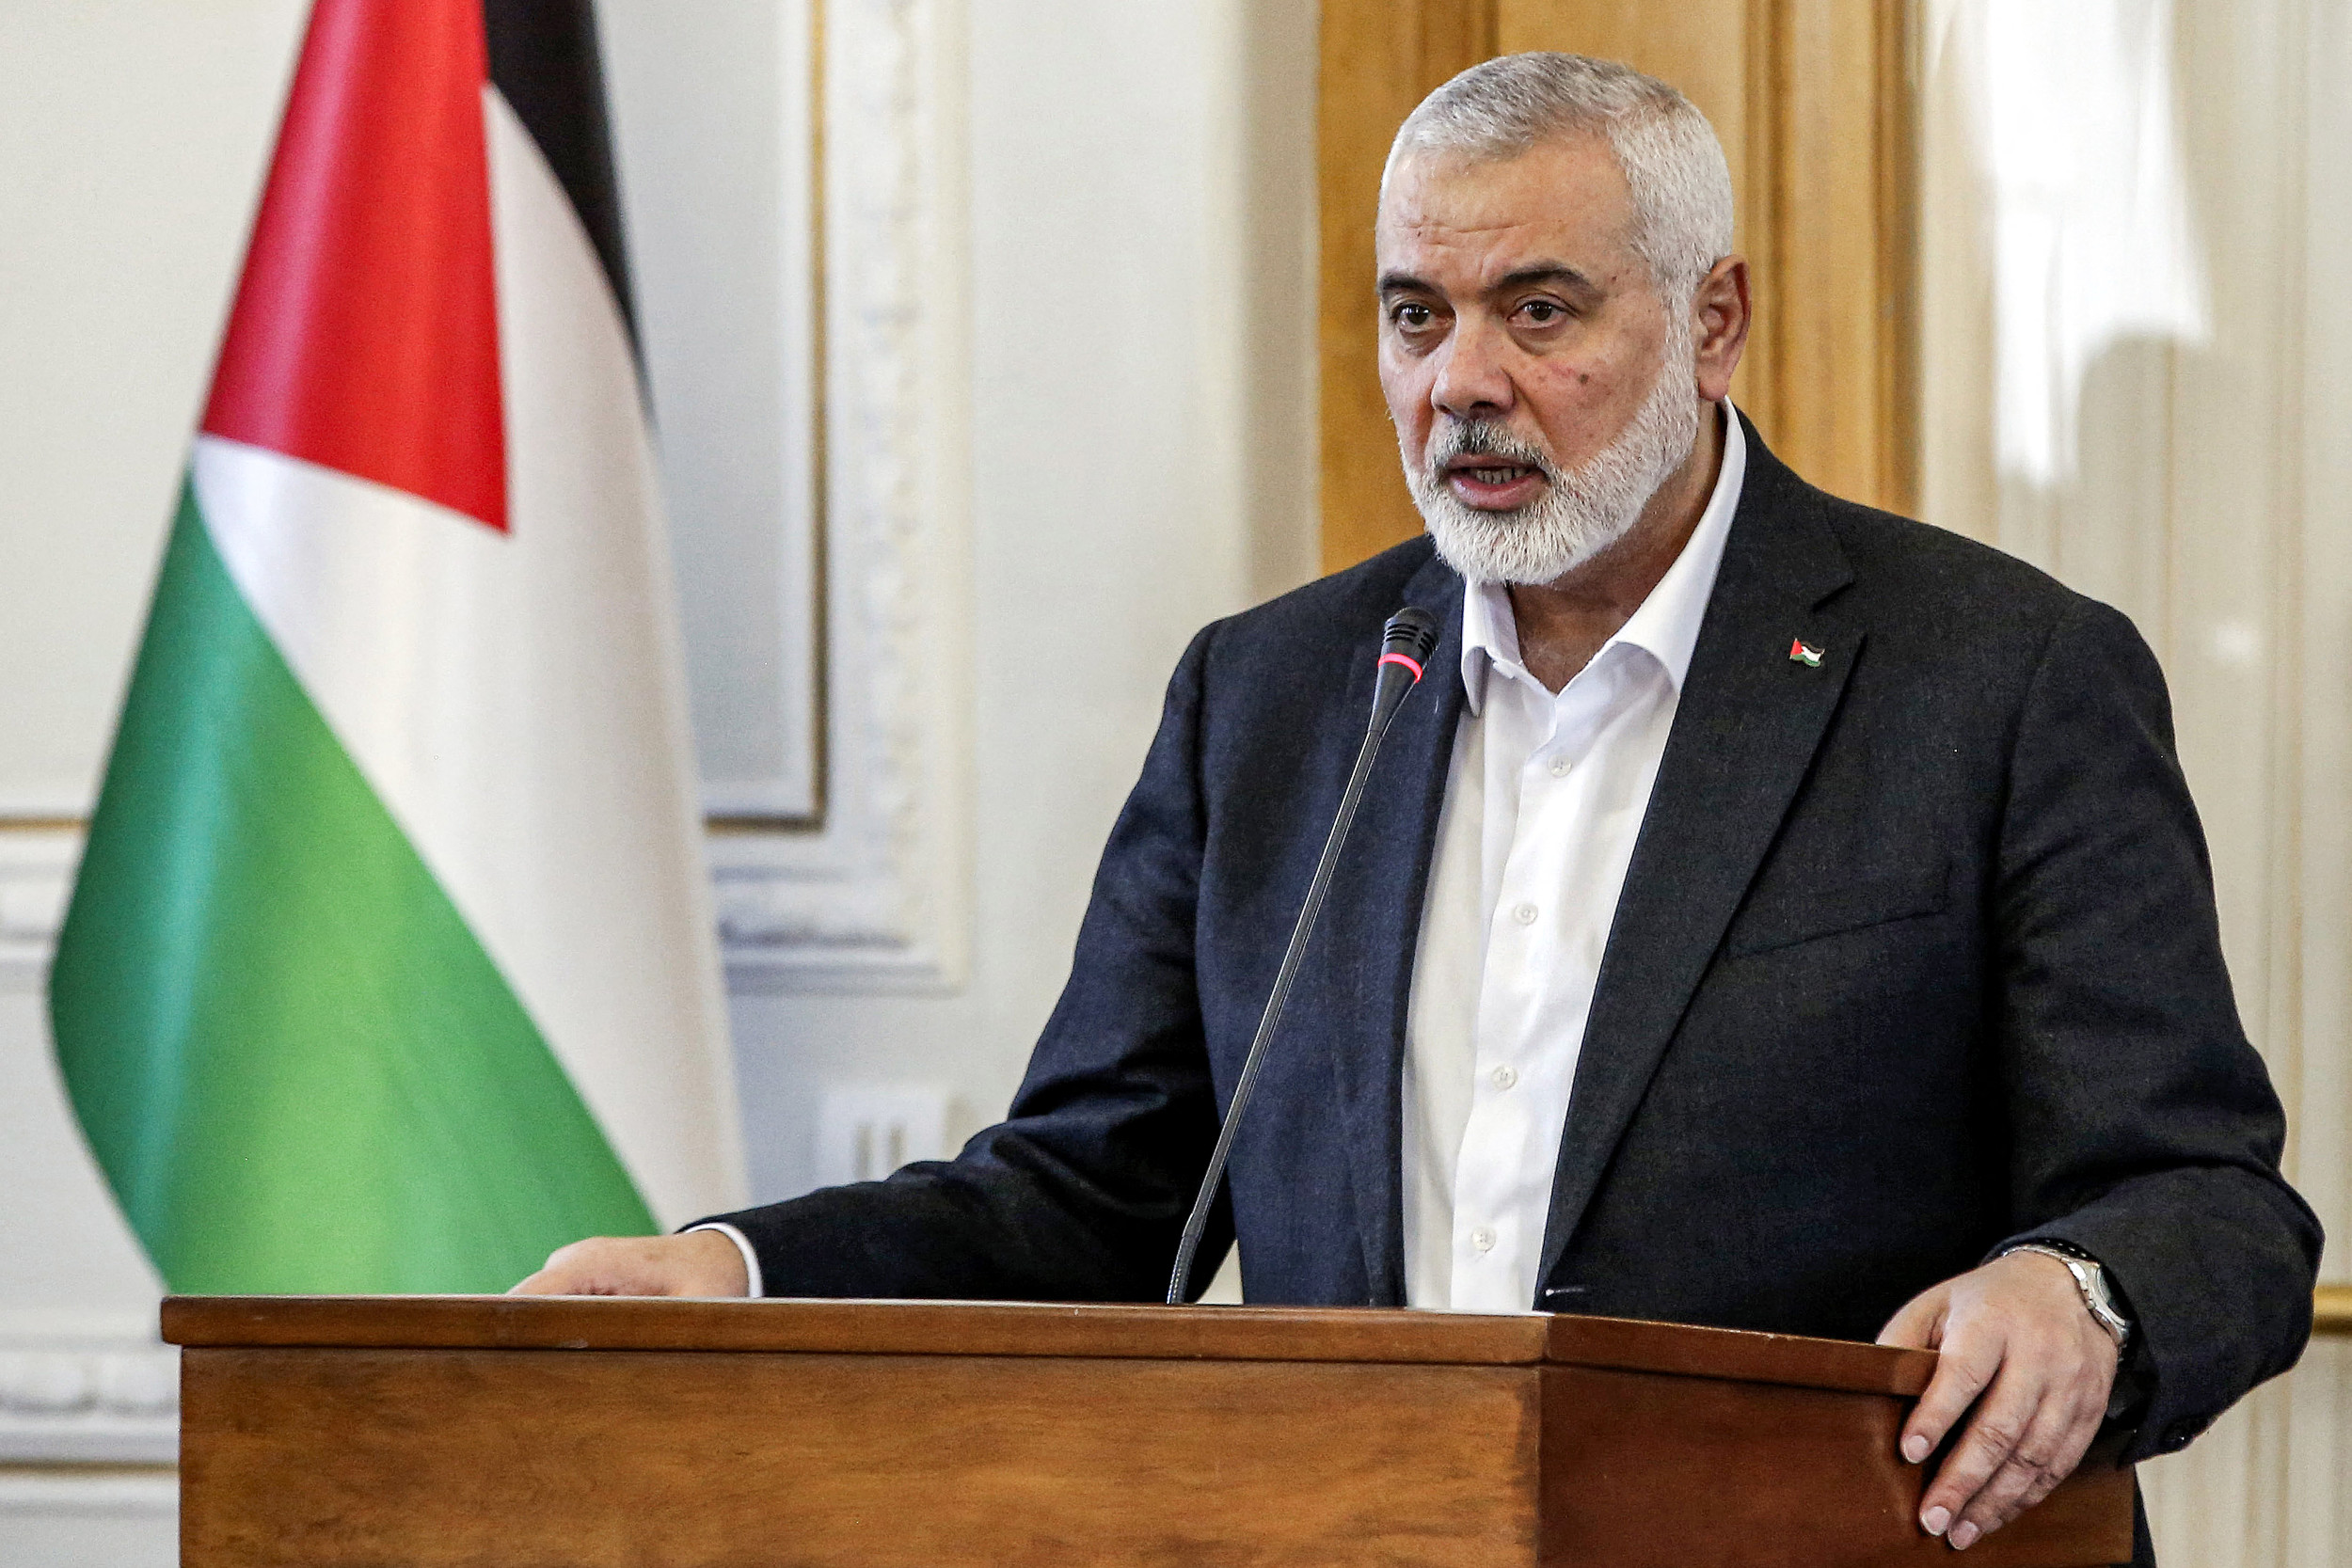 Hamas leader reacts to 3 sons being killed: “Thank God”